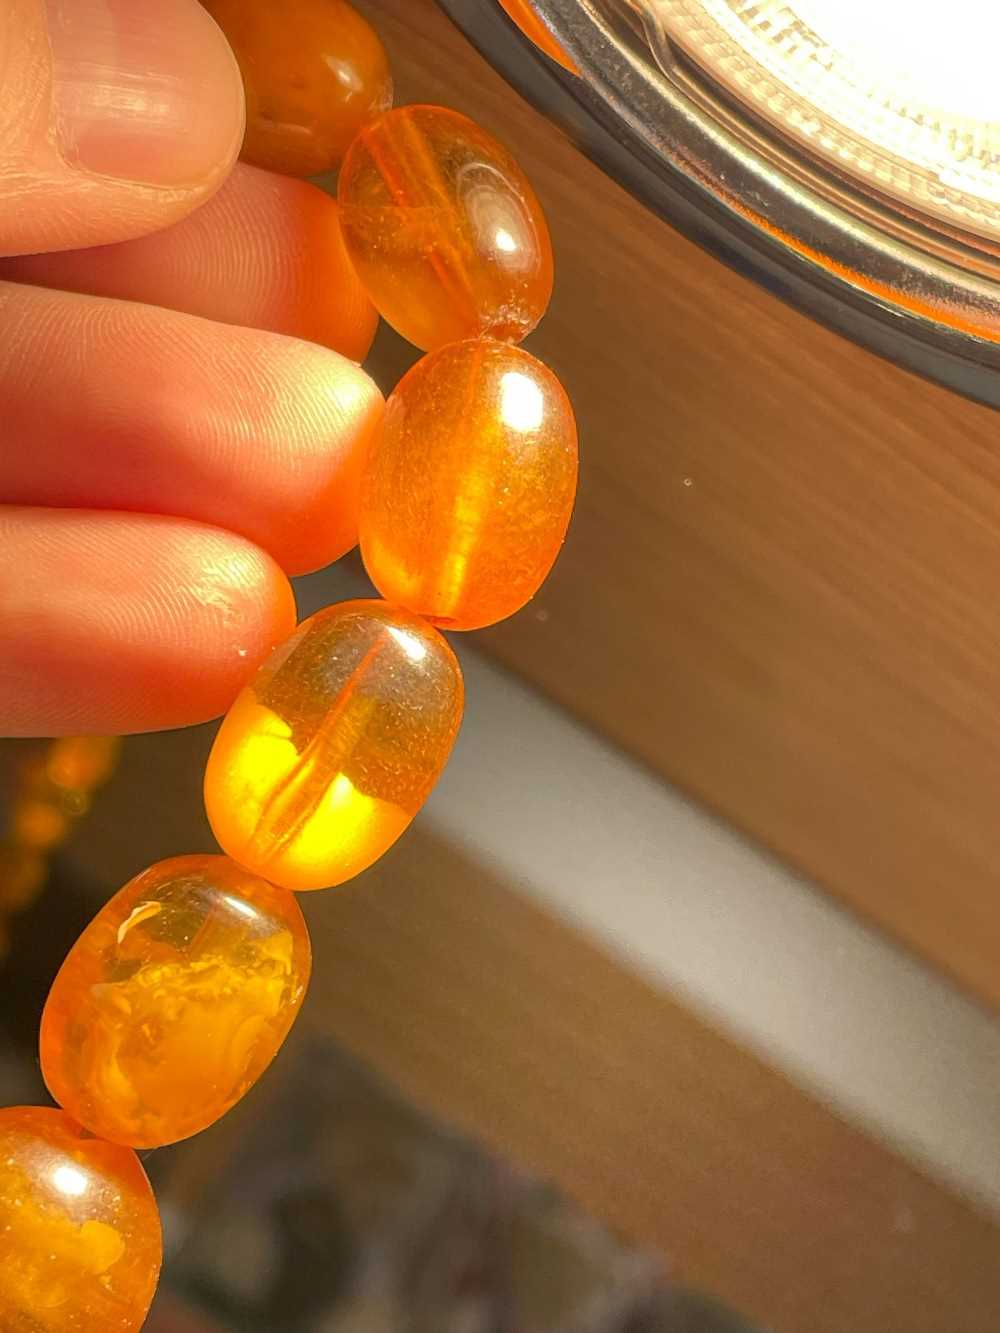 SINGLE STRAND AMBER BEAD NECKLACE, beads 13mm to 20mm, approx gross wt. 55gms - Image 9 of 13